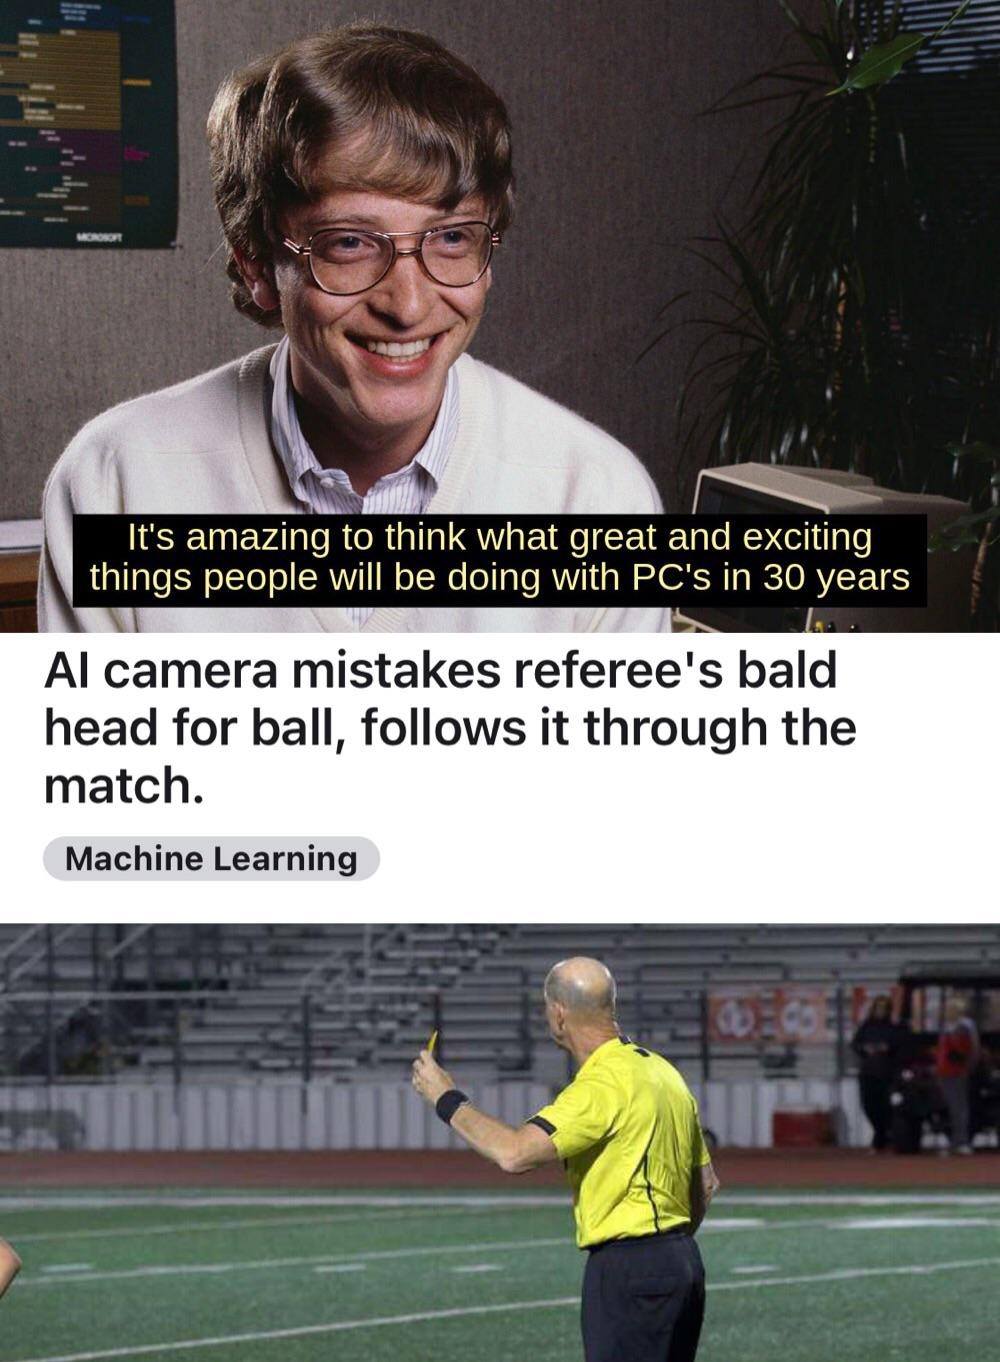 bill gates meme - It's amazing to think what great and exciting things people will be doing with Pc's in 30 years Al camera mistakes referee's bald head for ball, s it through the match. Machine Learning